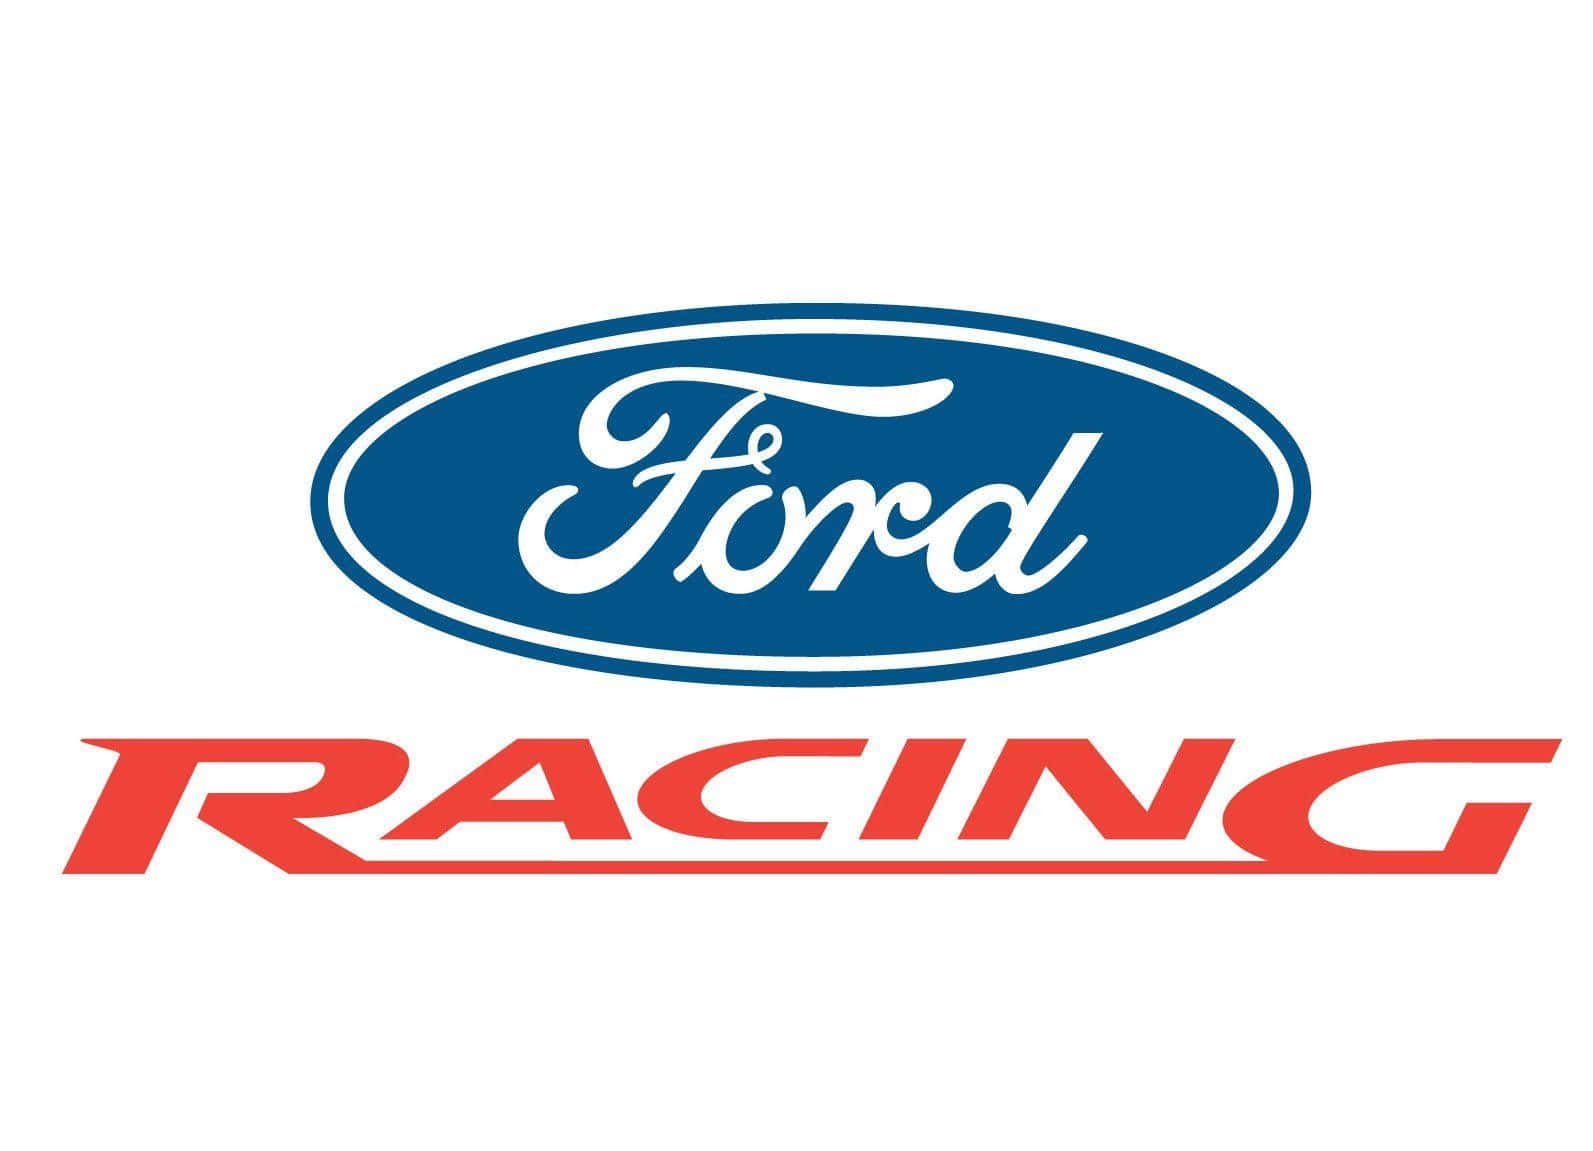 HD vintage ford logo wallpapers